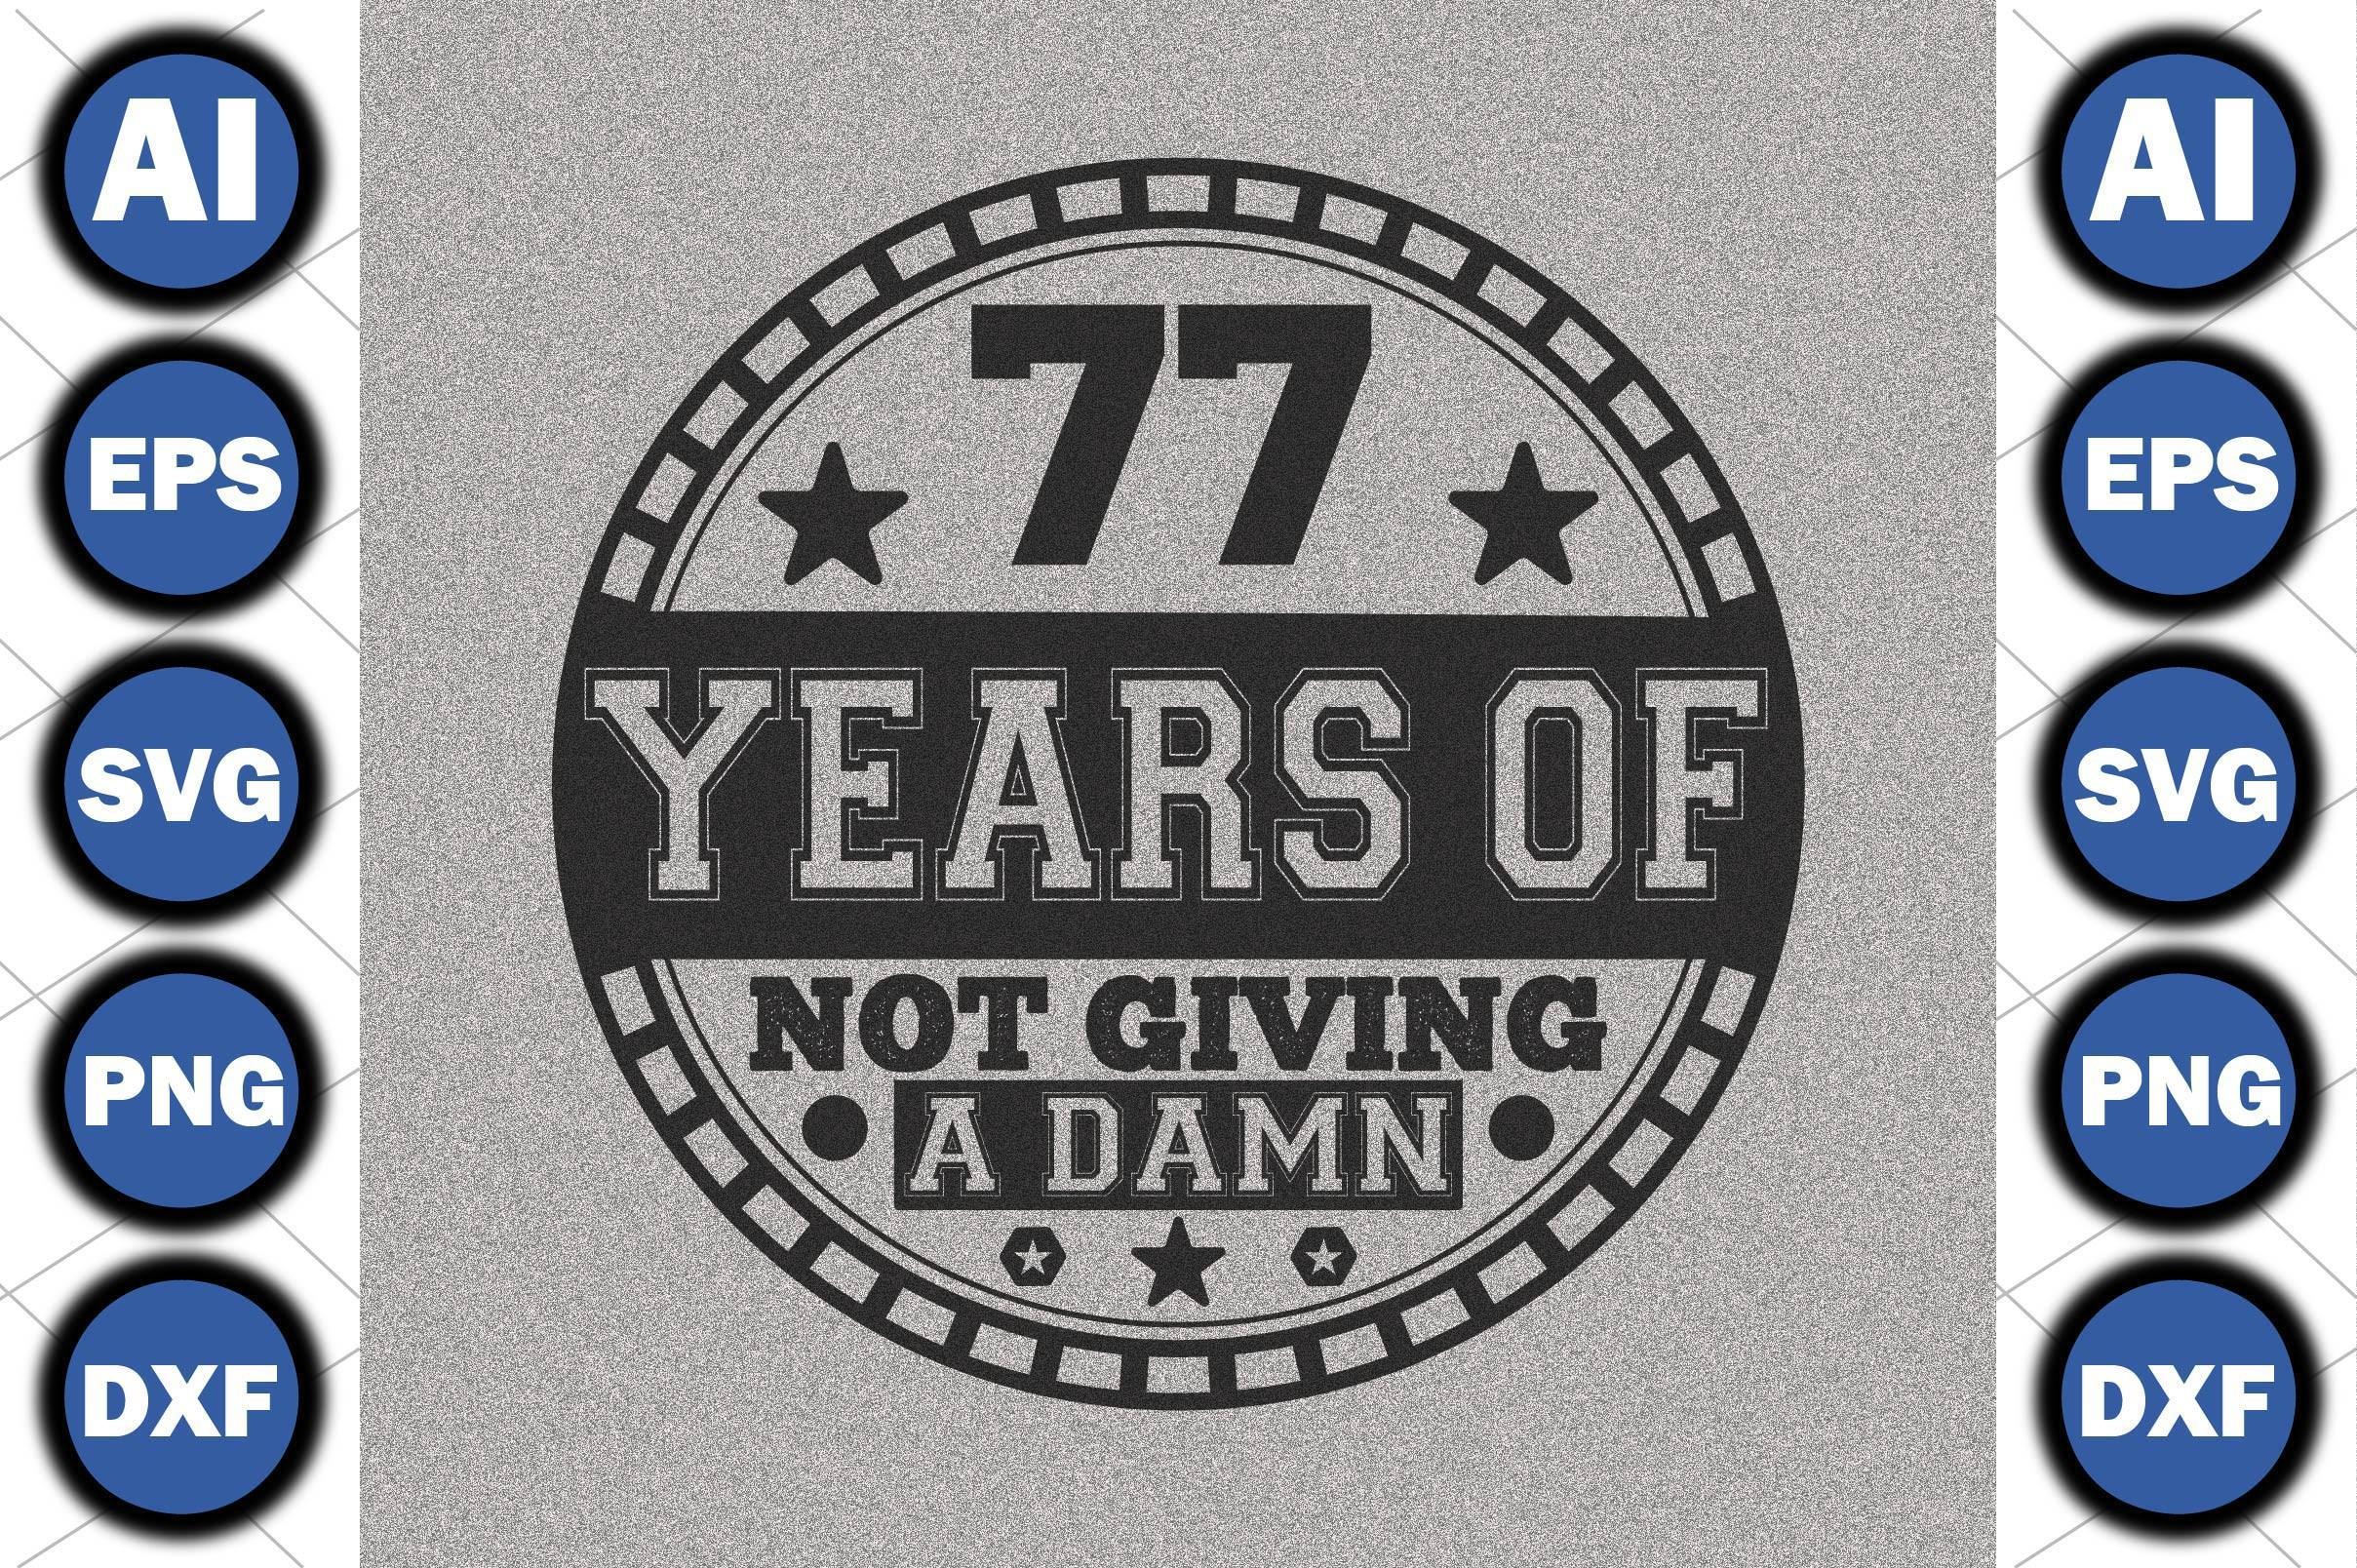 77 Years of Not Giving a Damn